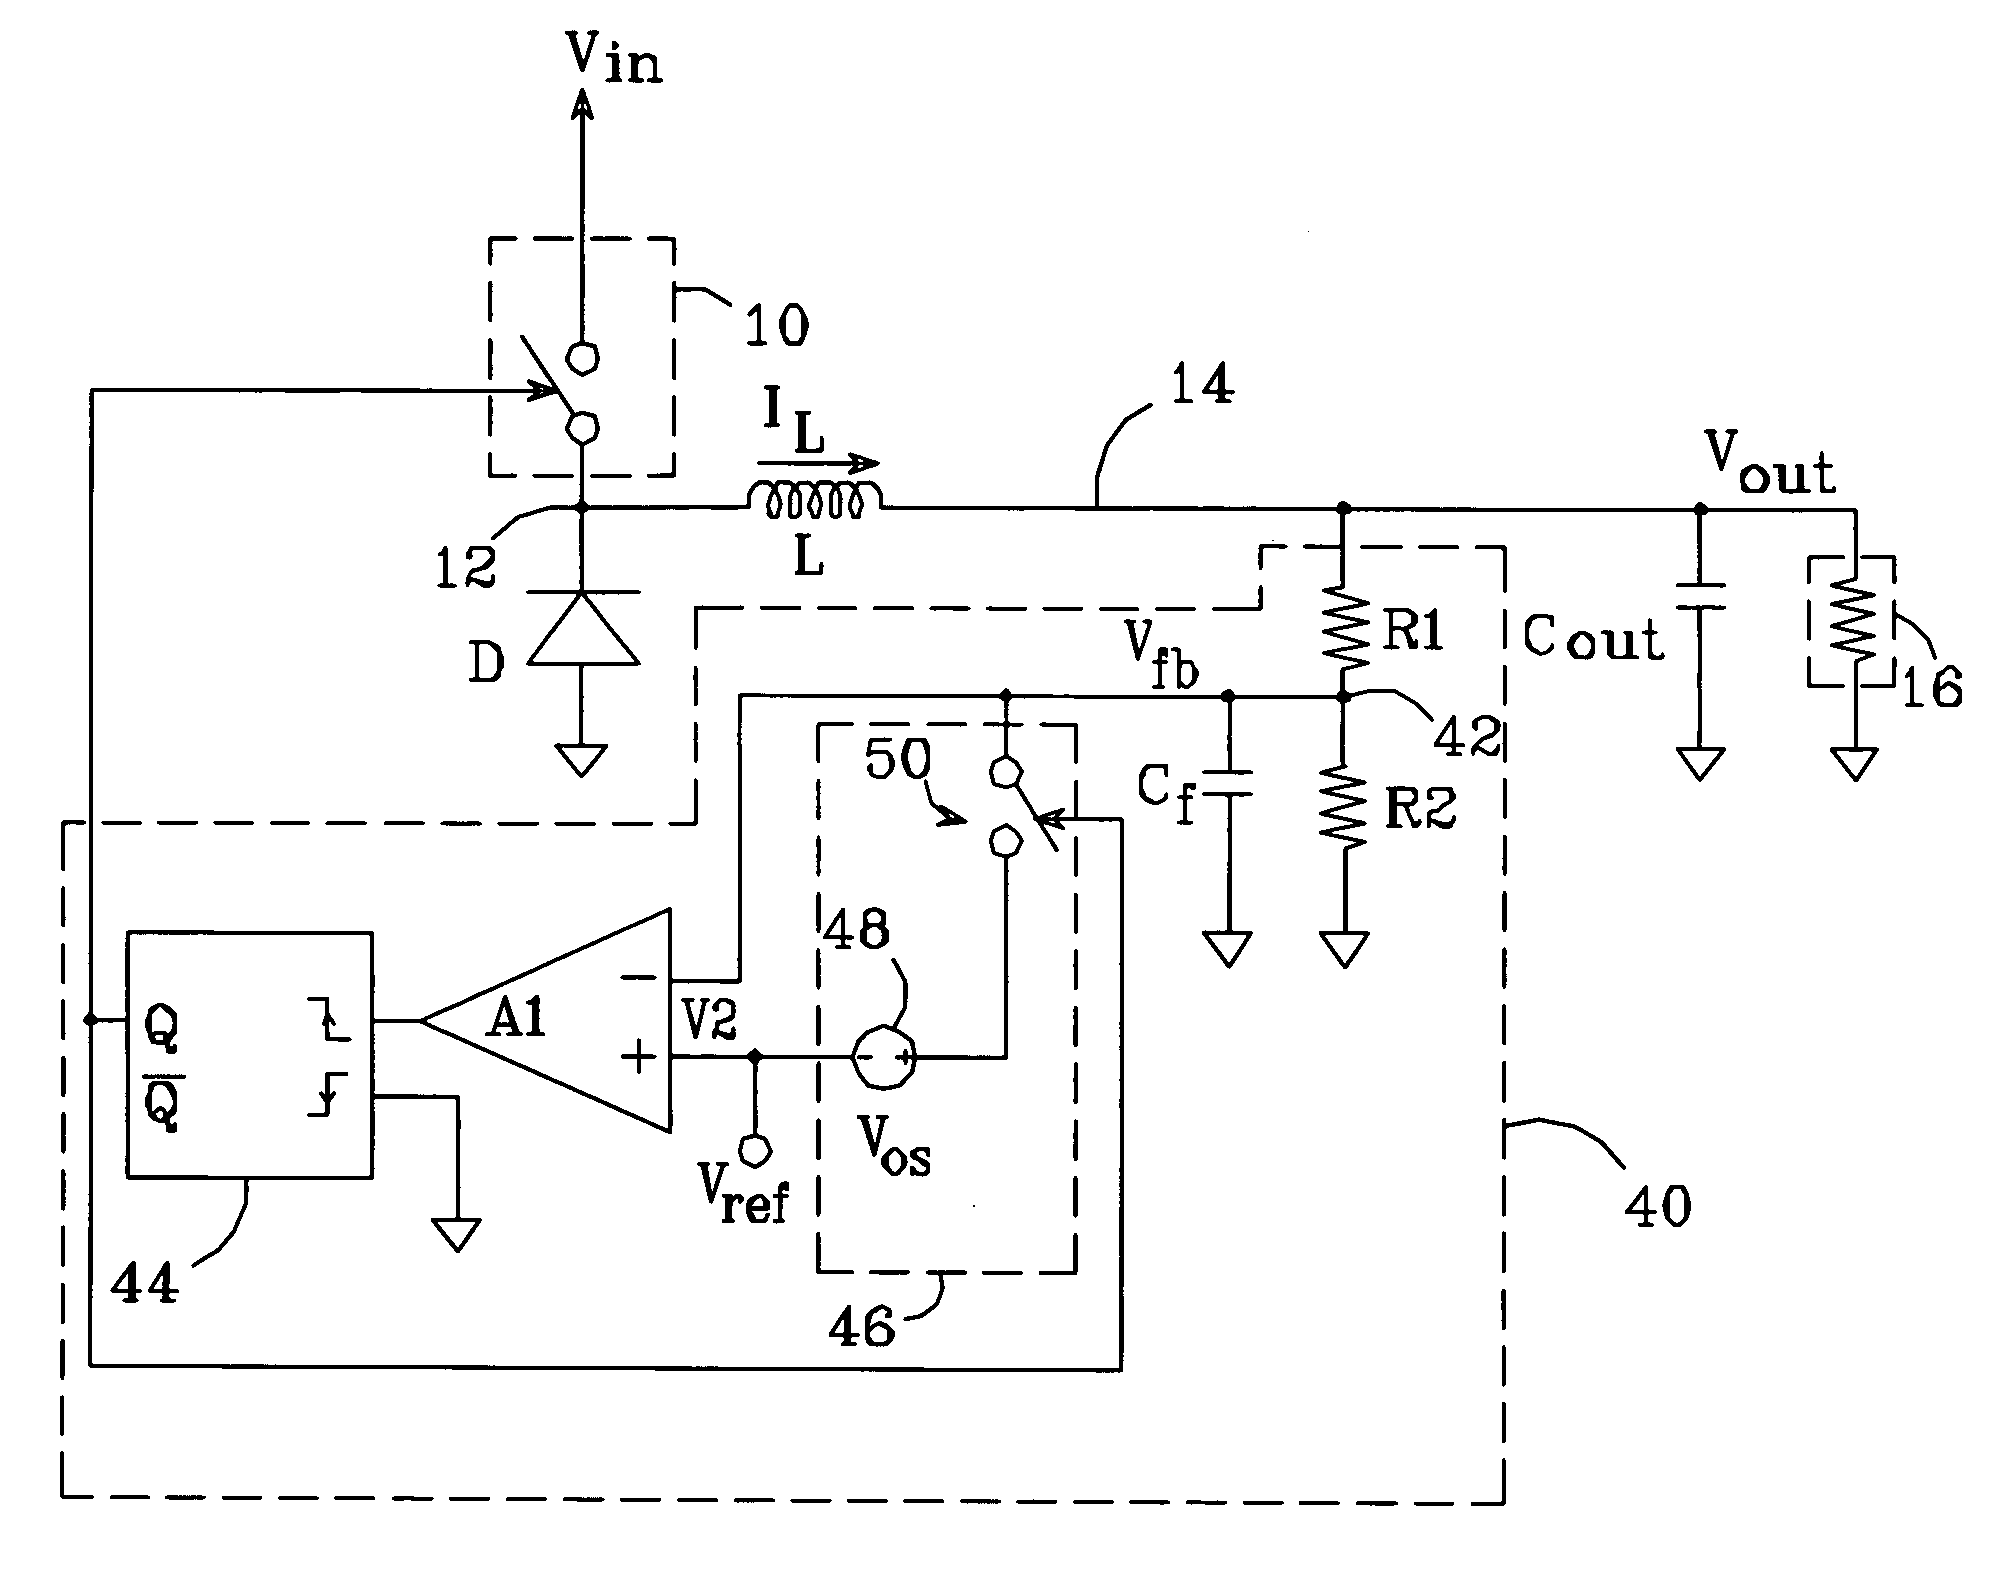 Switched noise filter circuit for a DC-DC converter